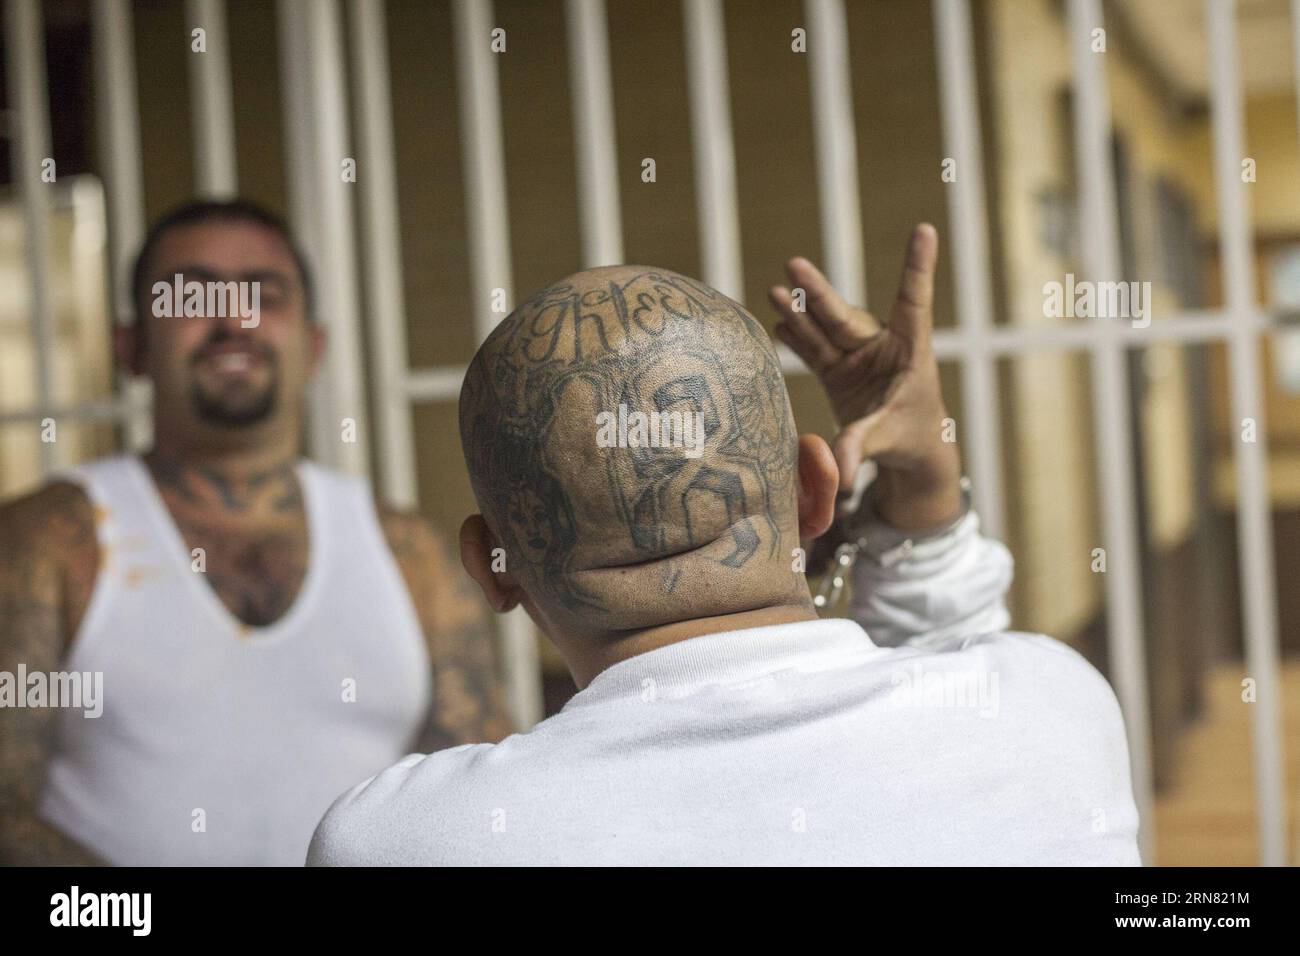 (150930) -- GUATEMALA CITY, Sept. 30, 2015 -- Gangsters keep under custody in the Tower of Courts, in Guatemala City, capital of Guatemala, Sept. 30, 2015. A gang member was killed and two others wounded by rival gangsters of Barrio 18 and Mara Salvatrucha while they were held under custody in the Tower of Courts basement, located in the Civic Center of the Guatemalan capital, according to local press information. Luis Echeverria) (jg) (sp) GUATEMALA-GUATEMALA CITY-VIOLENCE e LuisxEcheverria PUBLICATIONxNOTxINxCHN   Guatemala City Sept 30 2015 Gangsters keep Under custody in The Tower of Court Stock Photo